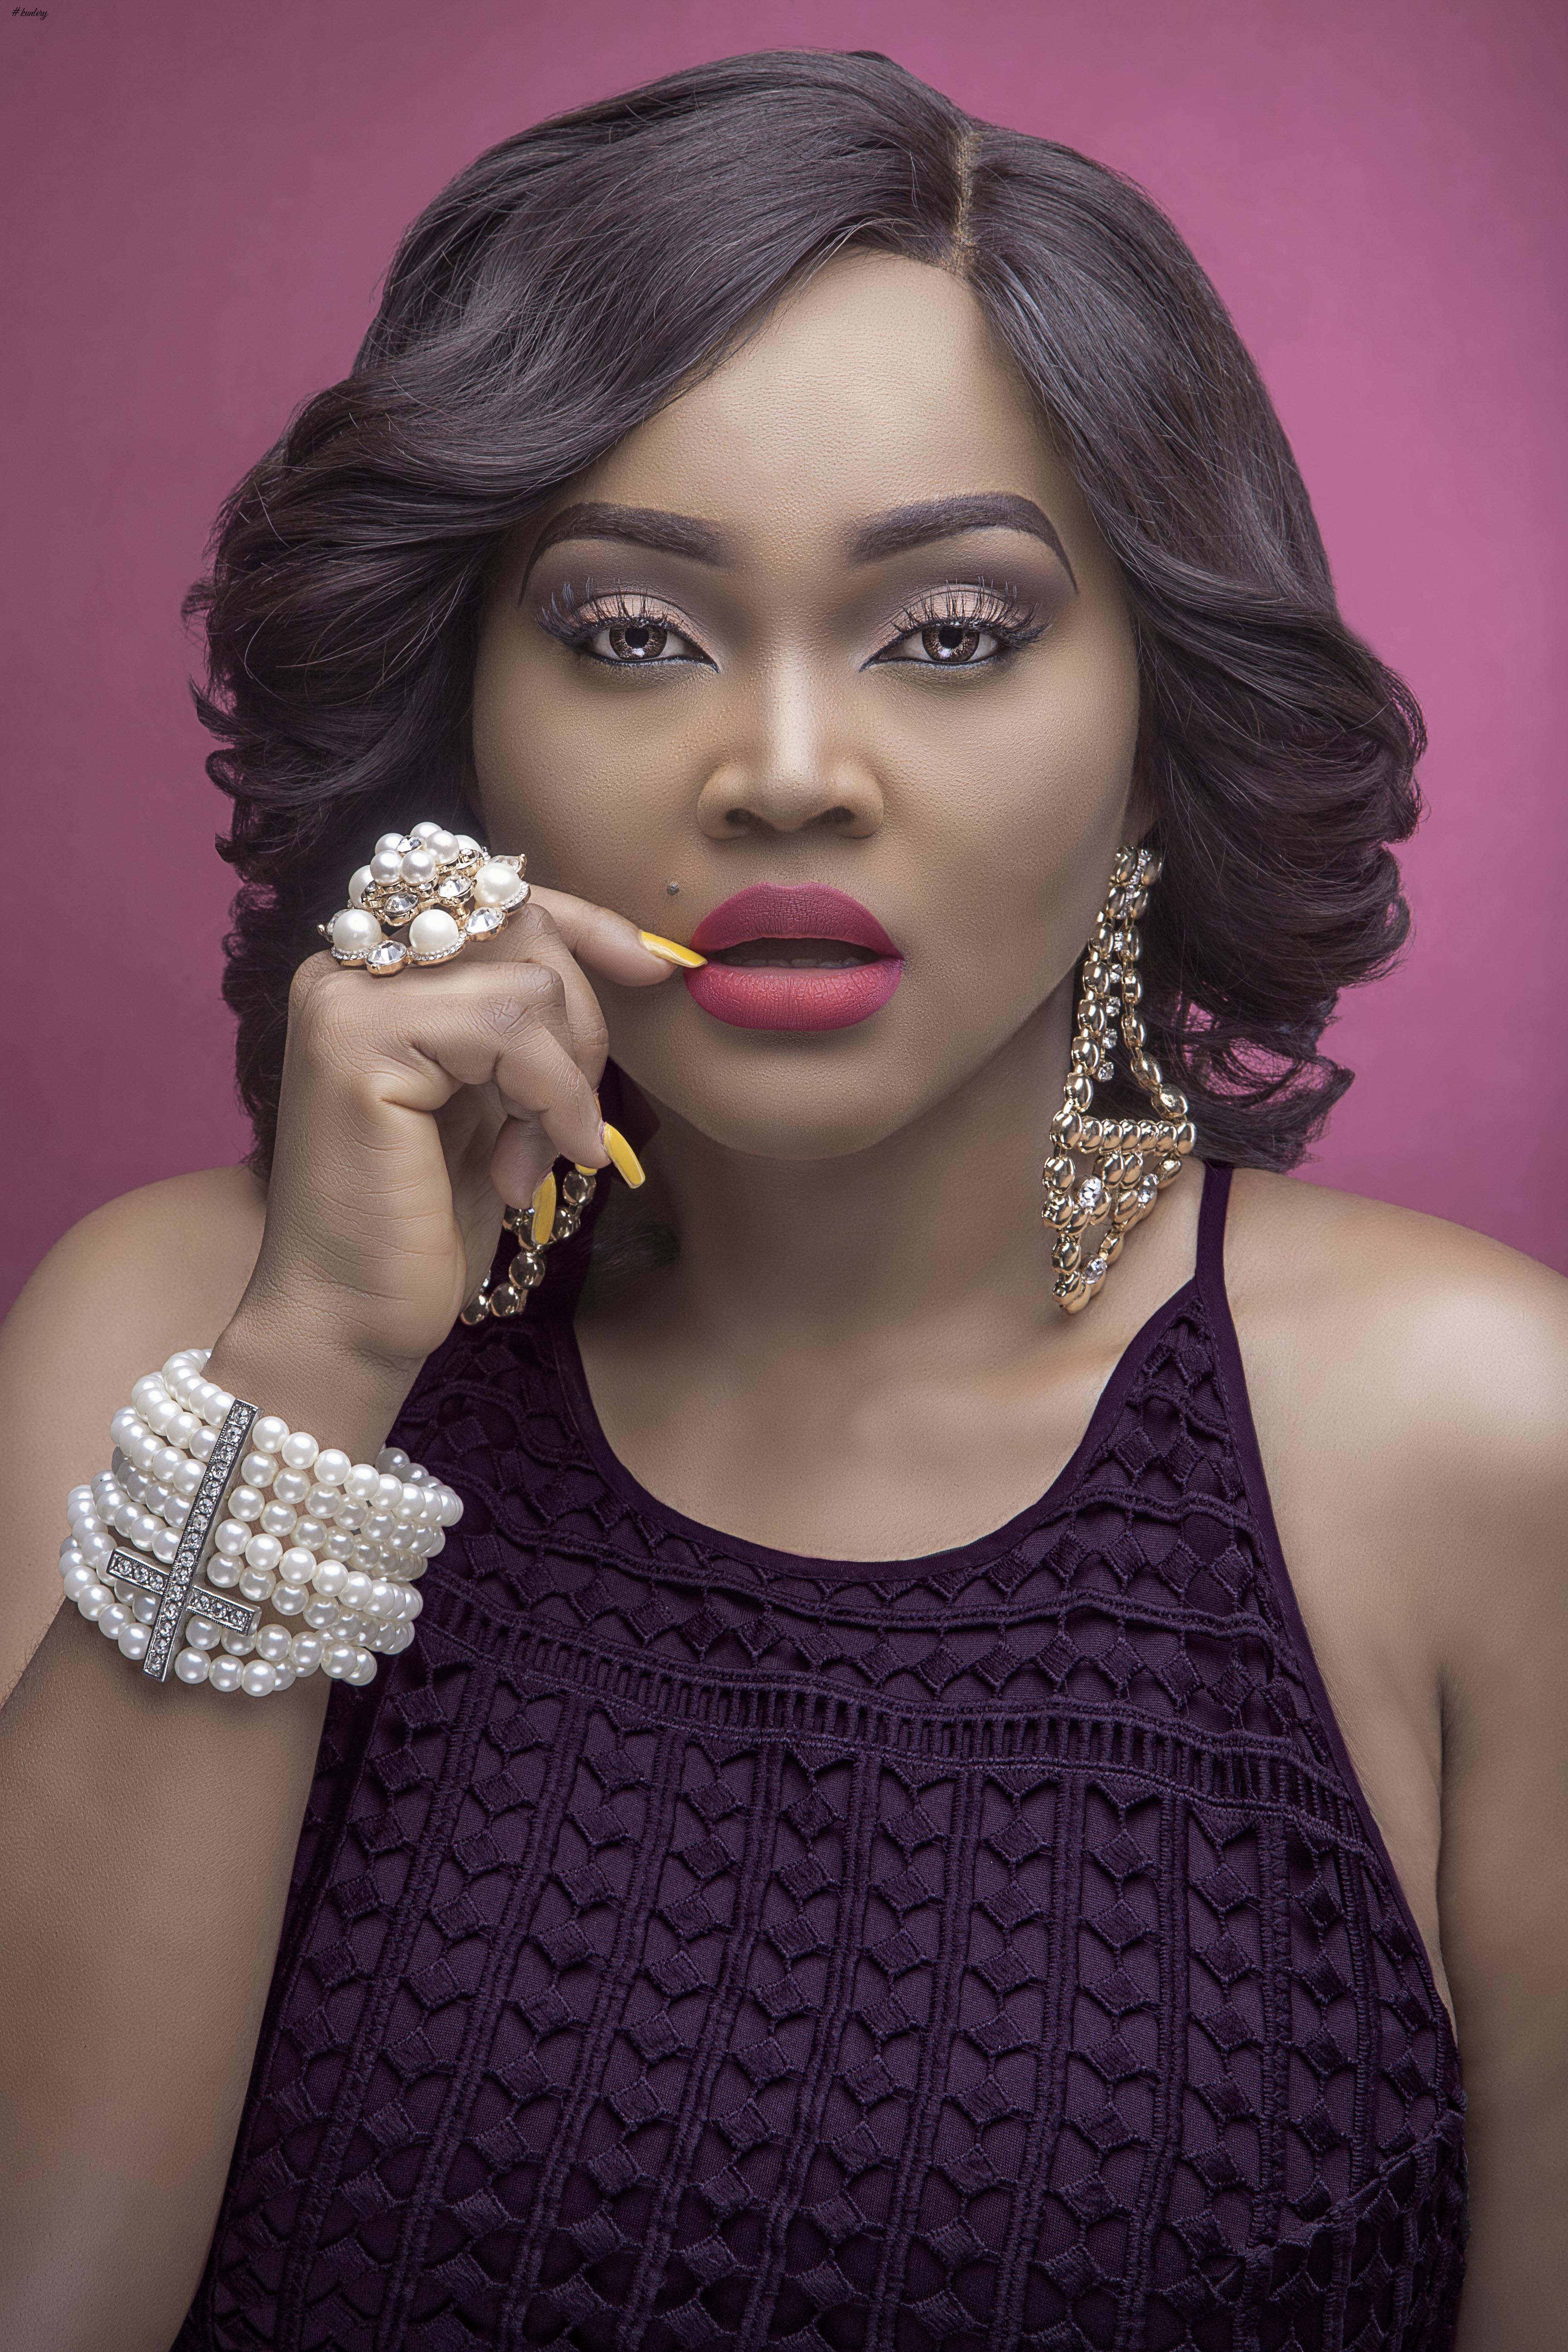 Move Over Beyonce! Check Out Photos Of Actress Mercy Aigbe-Gentry 70s & Vintage Inspired Looks